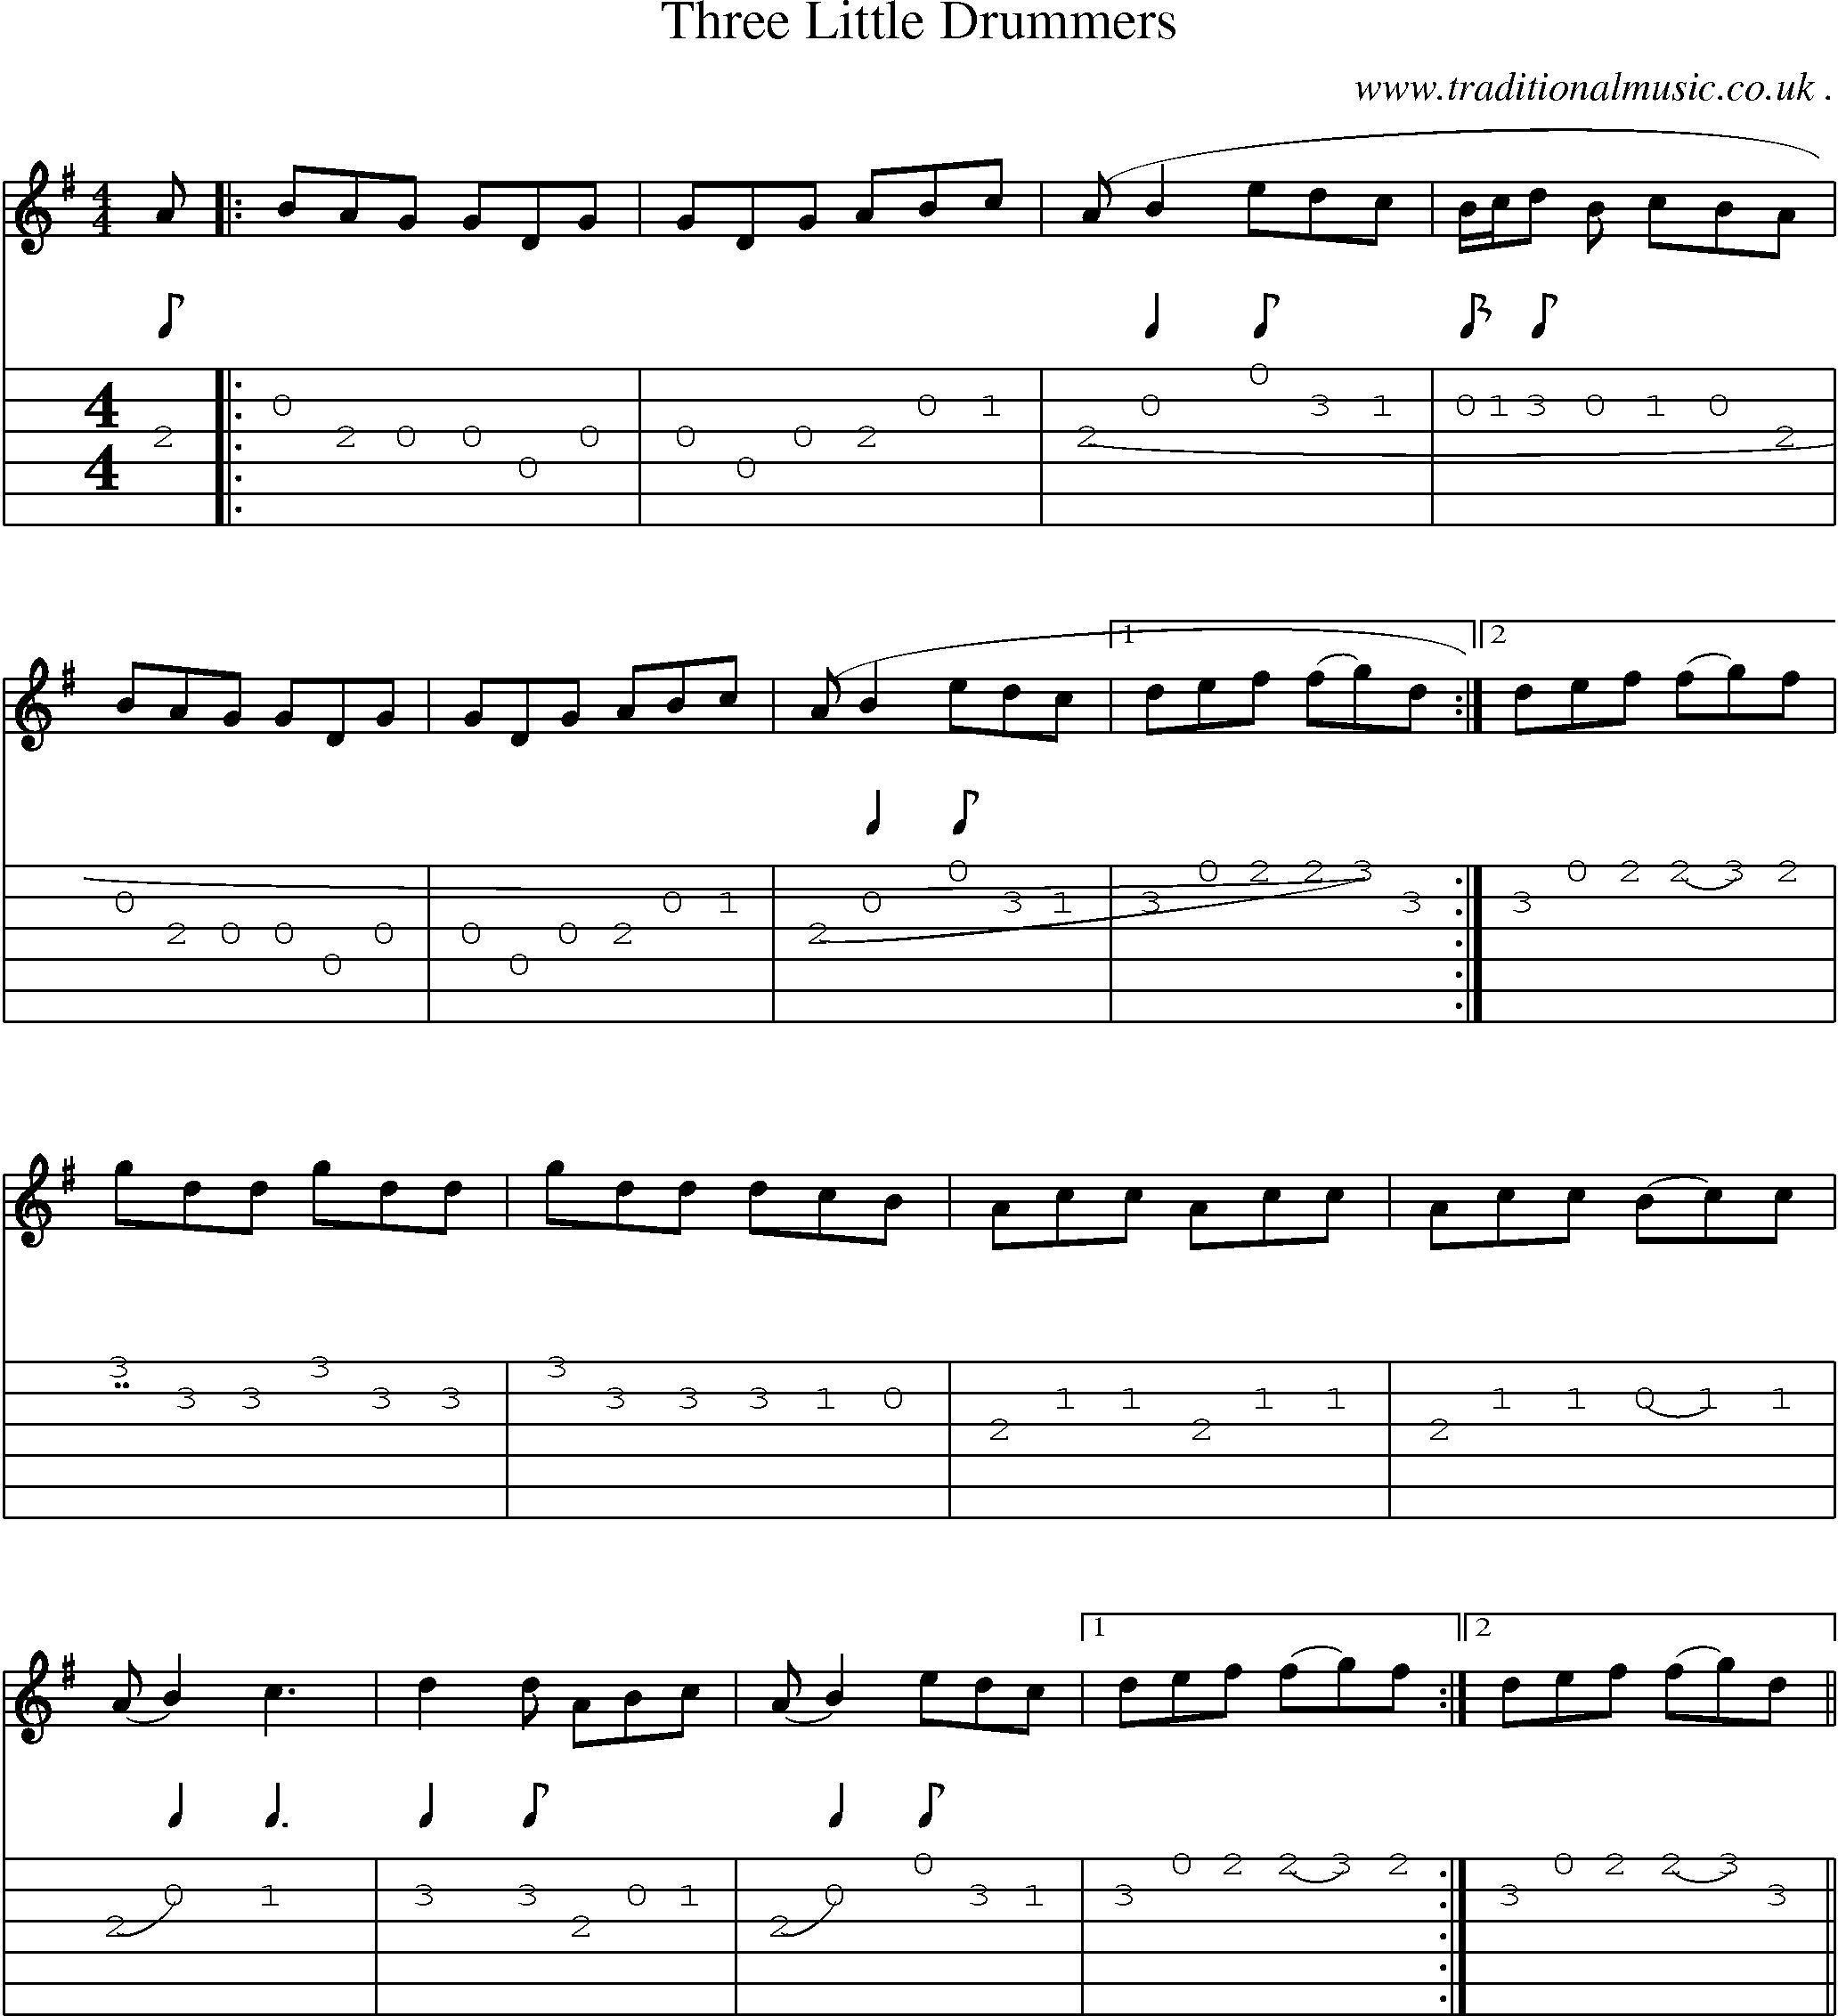 Sheet-Music and Guitar Tabs for Three Little Drummers